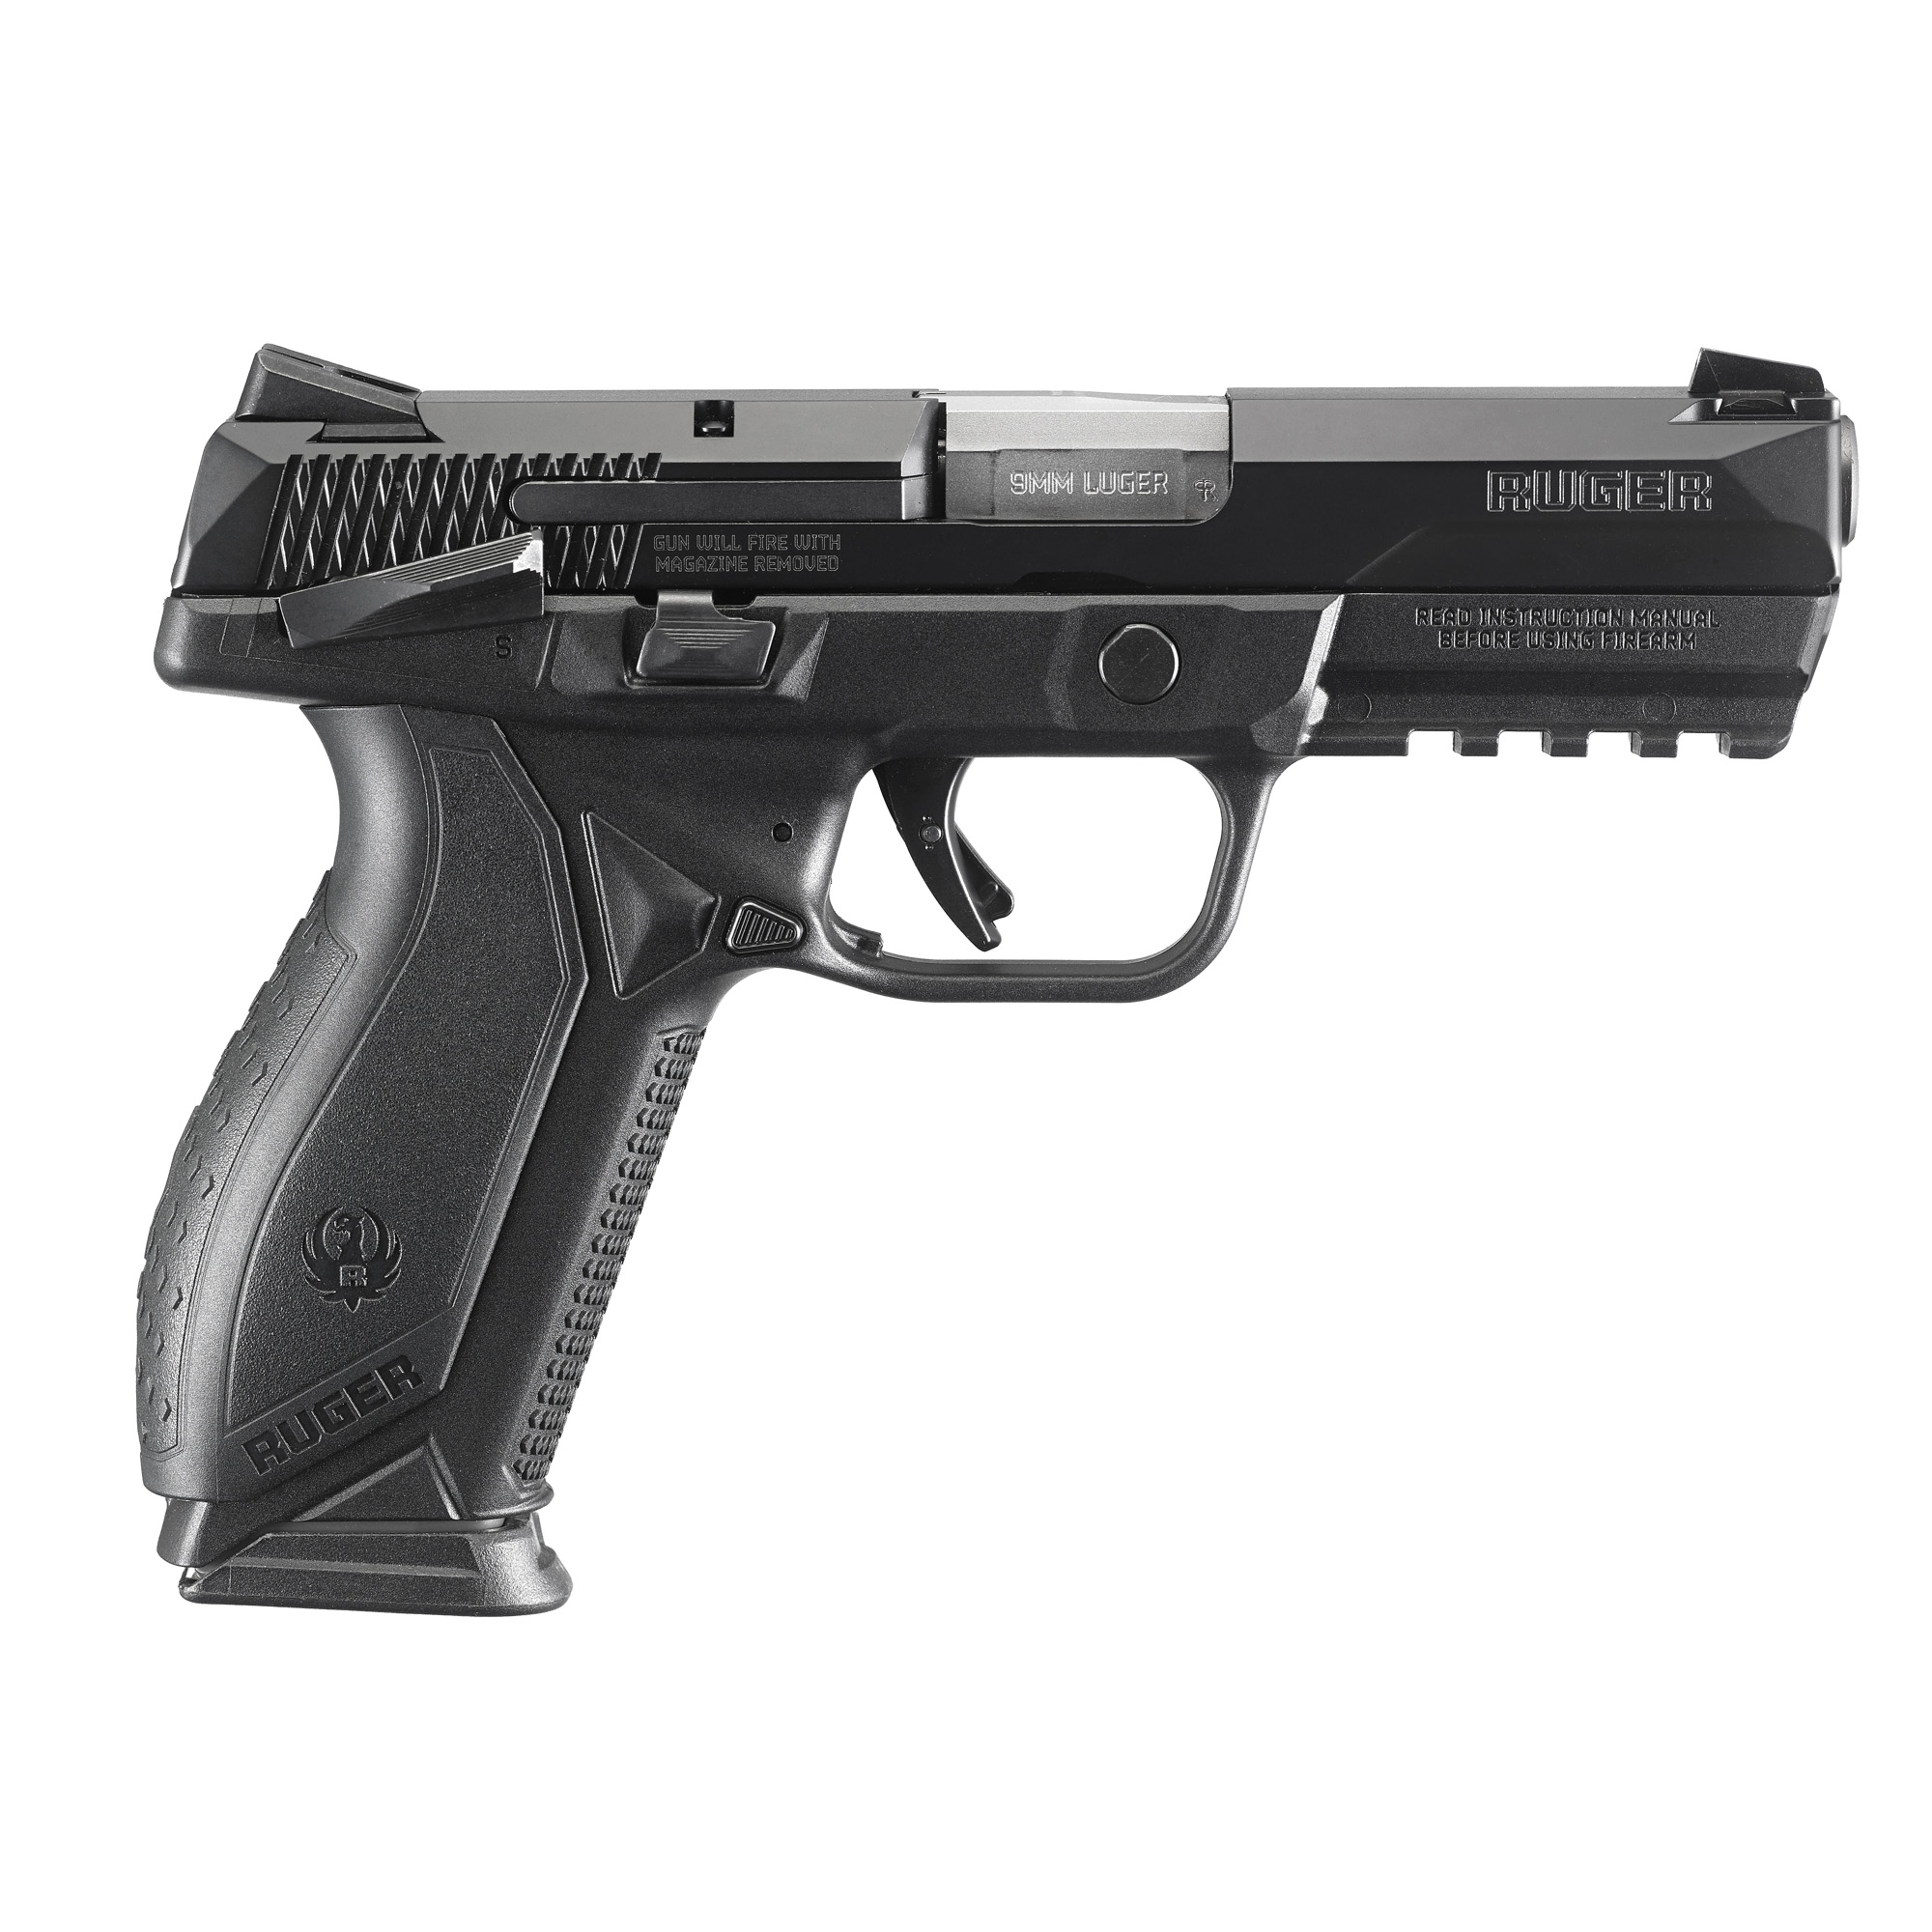 RUGER AMERICAN 9MM 4.2 10RD BLK TS